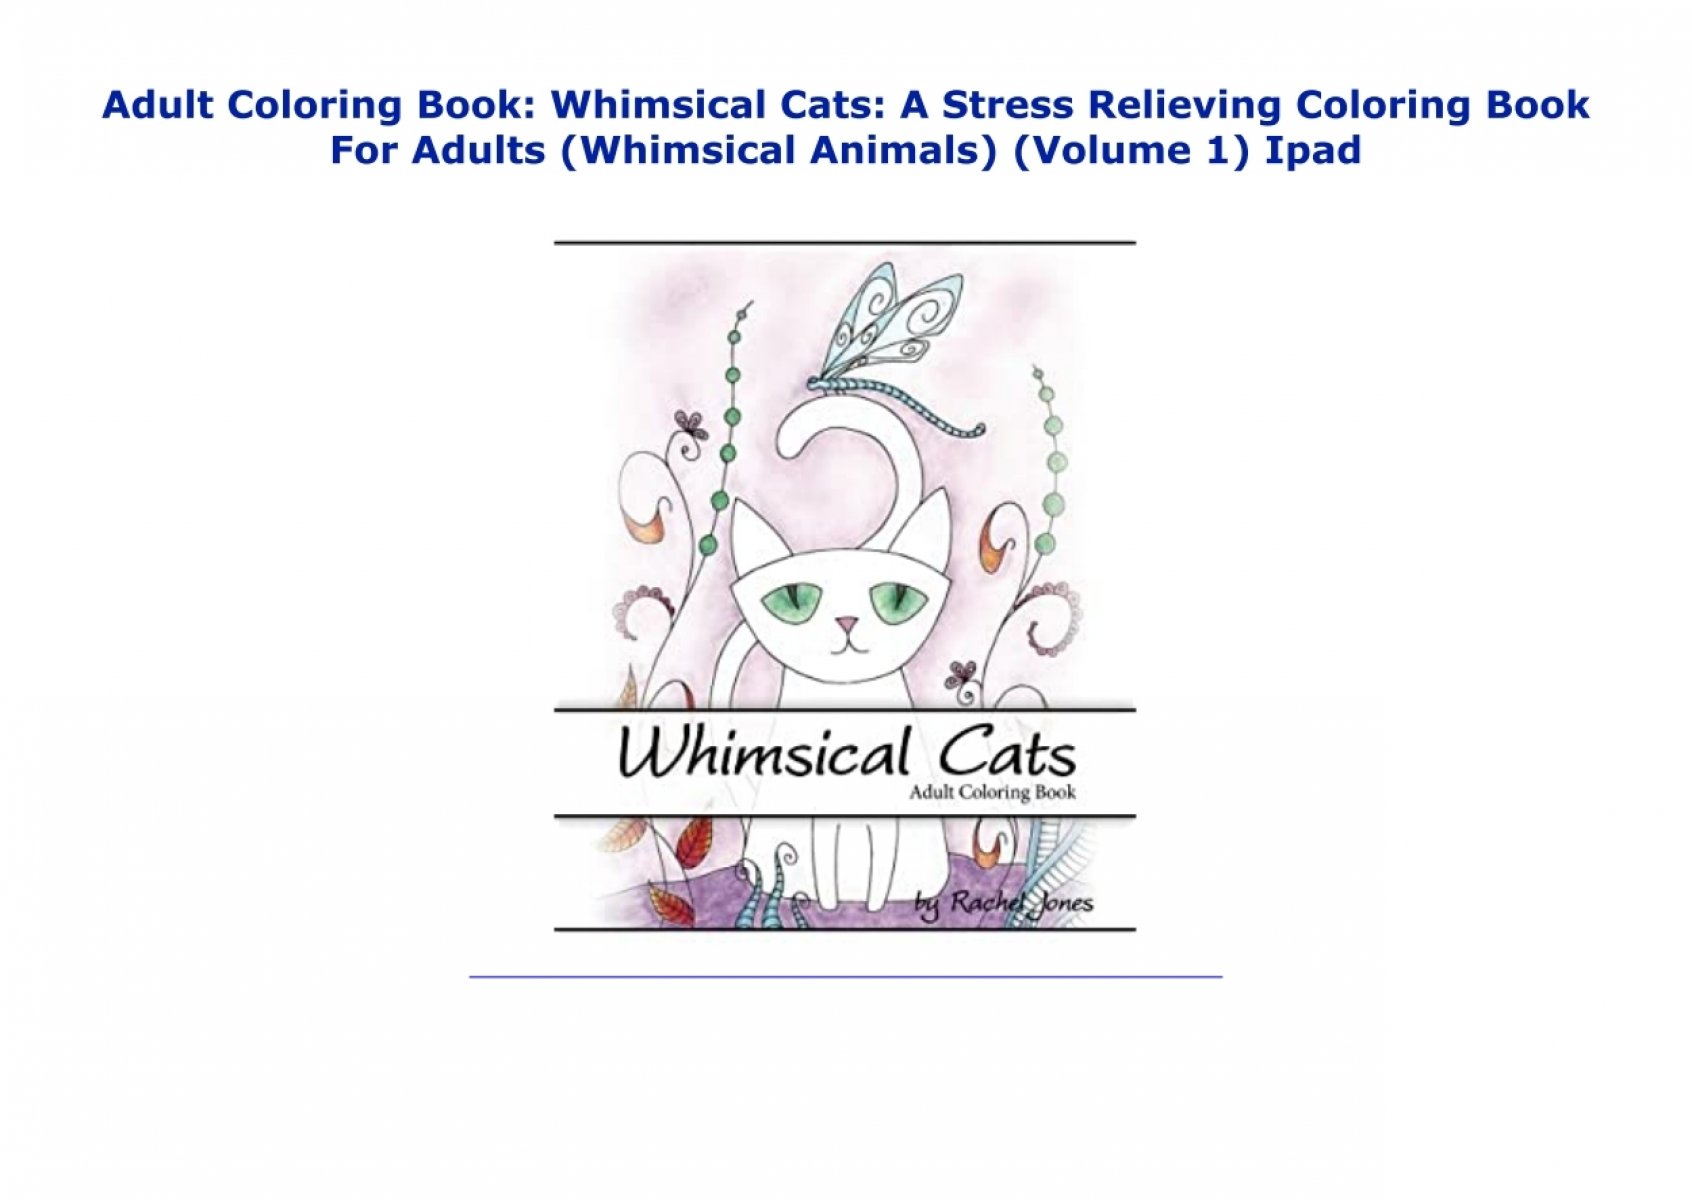 Download Adult Coloring Book Whimsical Cats A Stress Relieving Coloring Book For Adults Whimsical Animals Volume 1 Ipad